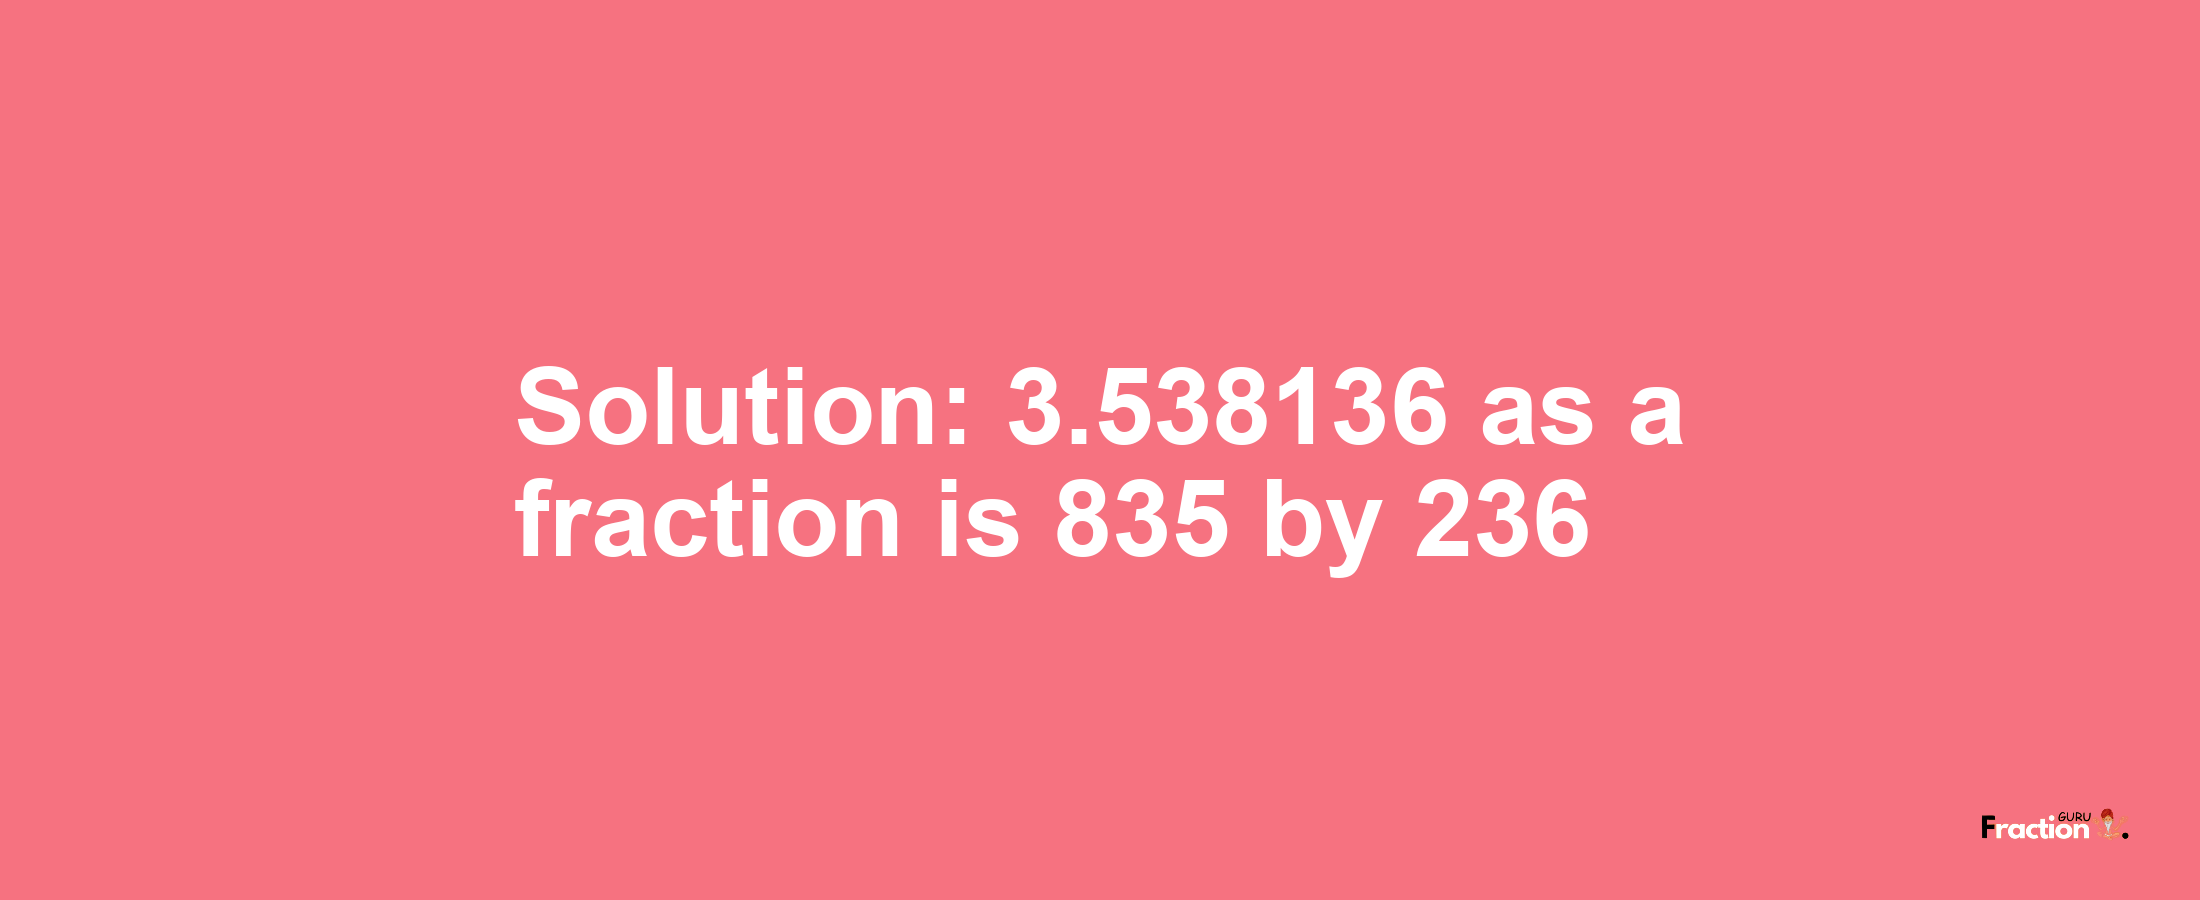 Solution:3.538136 as a fraction is 835/236